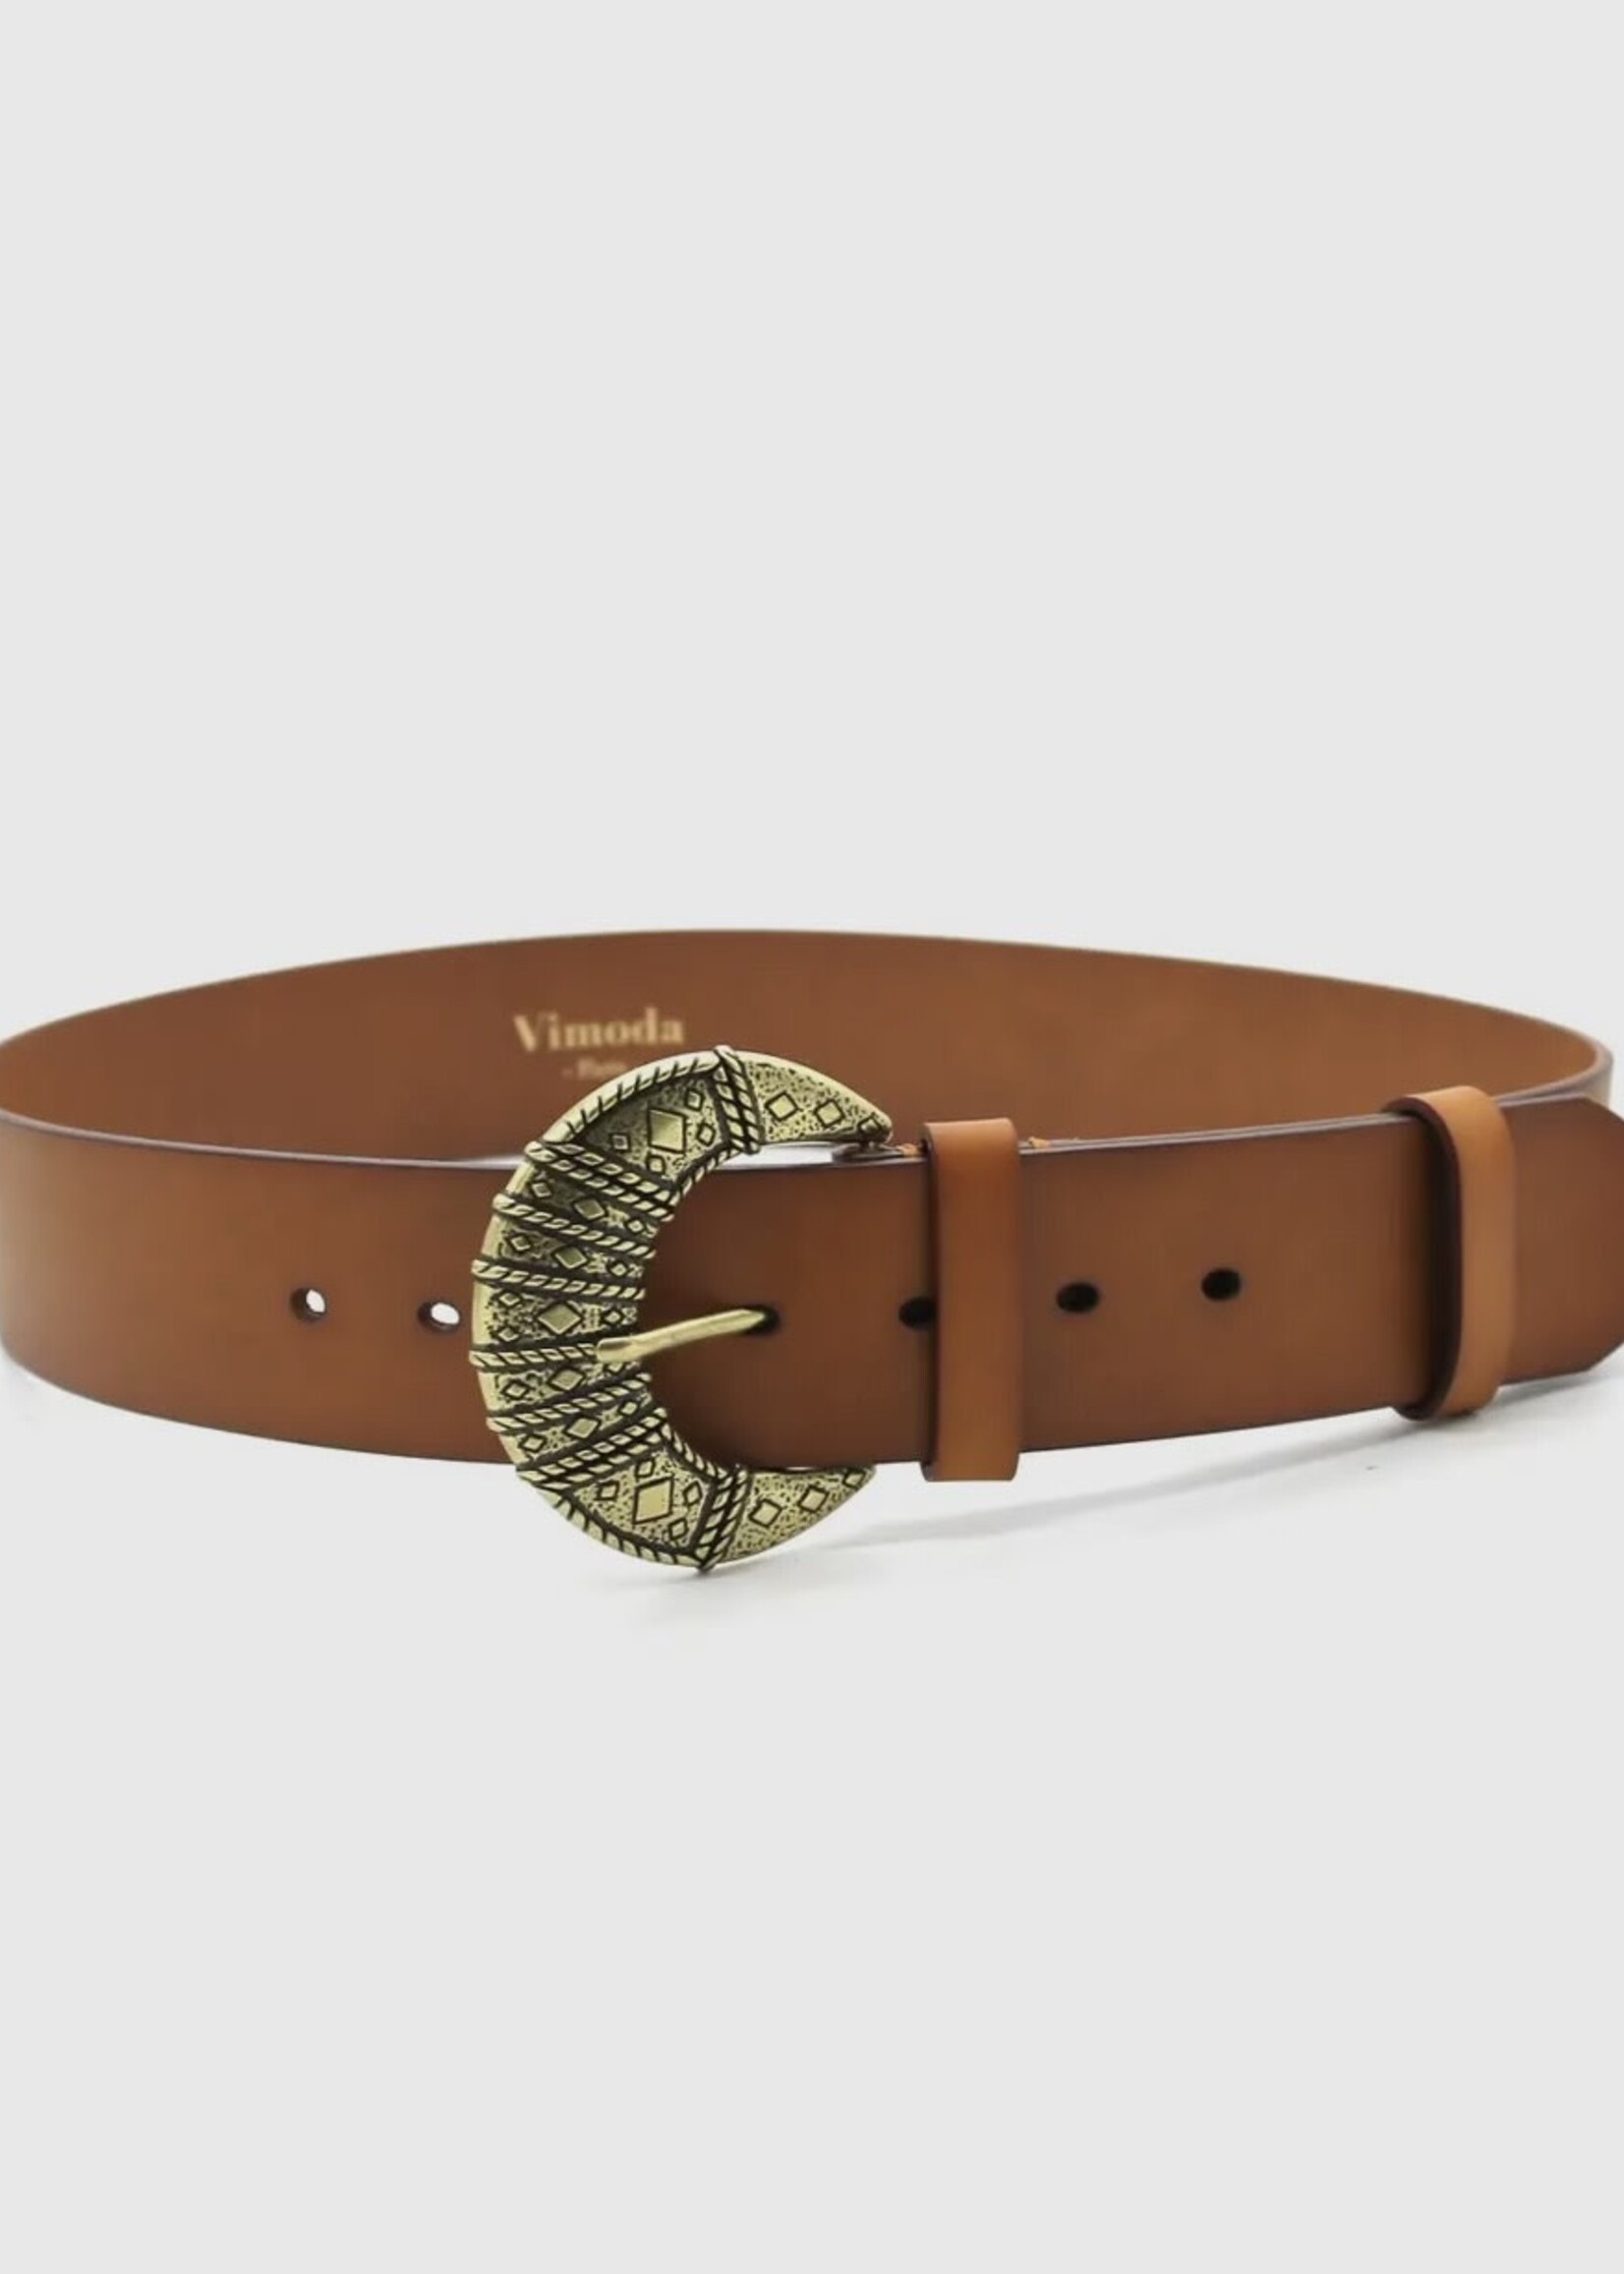 Bloom and Company Cally Crescent Moon Leather Belt